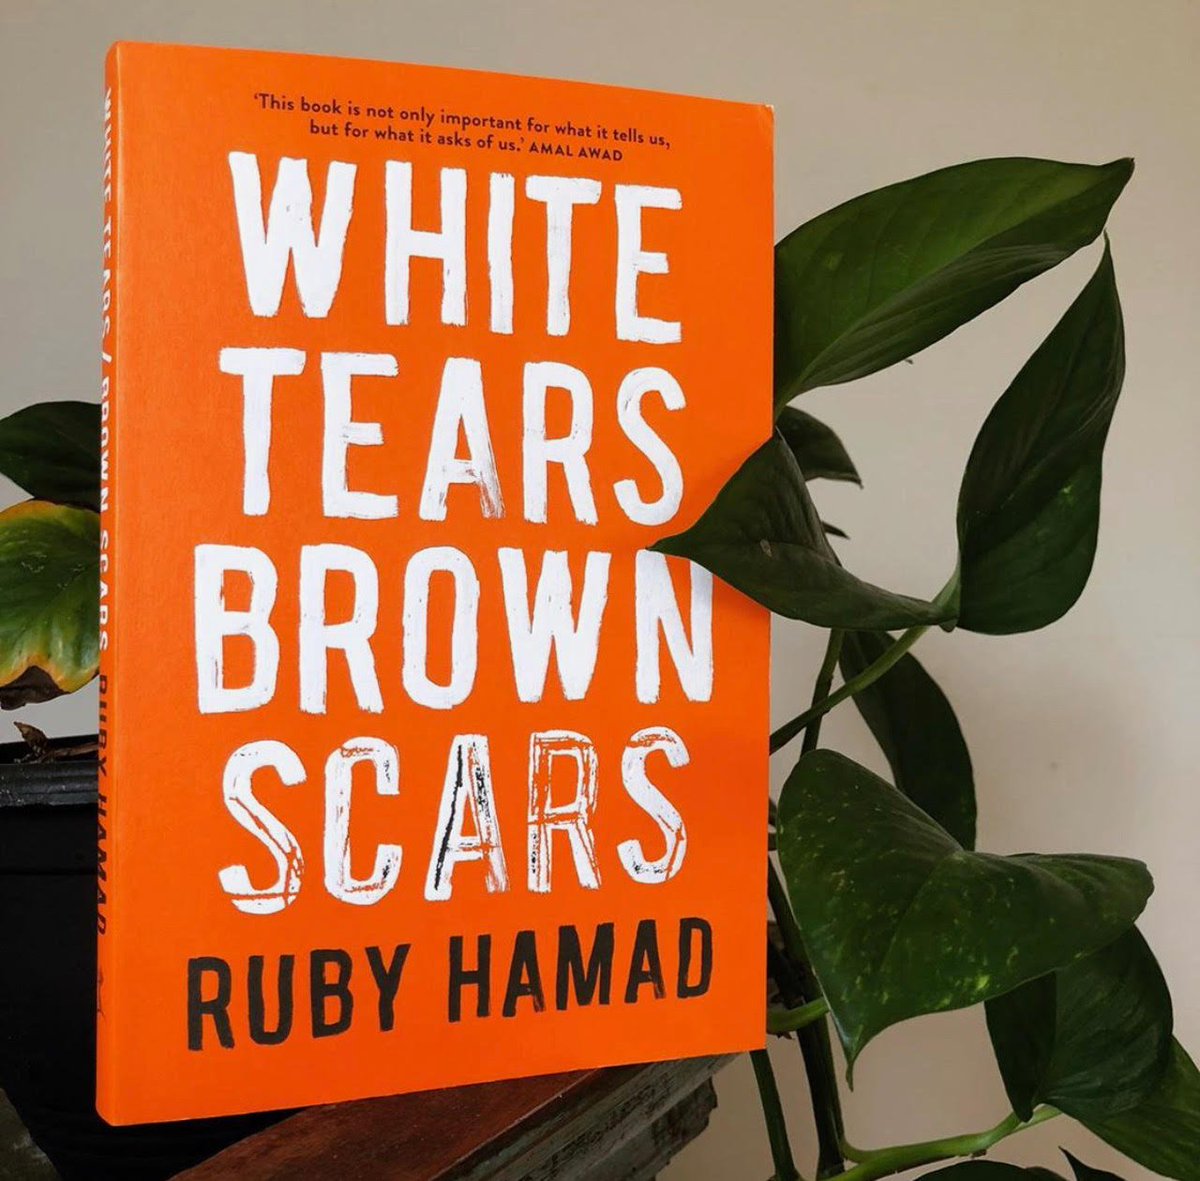 White Tears/Brown Scars, by Ruby Hamad  @MUPublishing   I love books that confound the dominant narrative, and this one definitely does. Chock-full of insight and arguments you can’t ignore, even as you realise – grimly – that’s what you’ve been doing for most of your life.